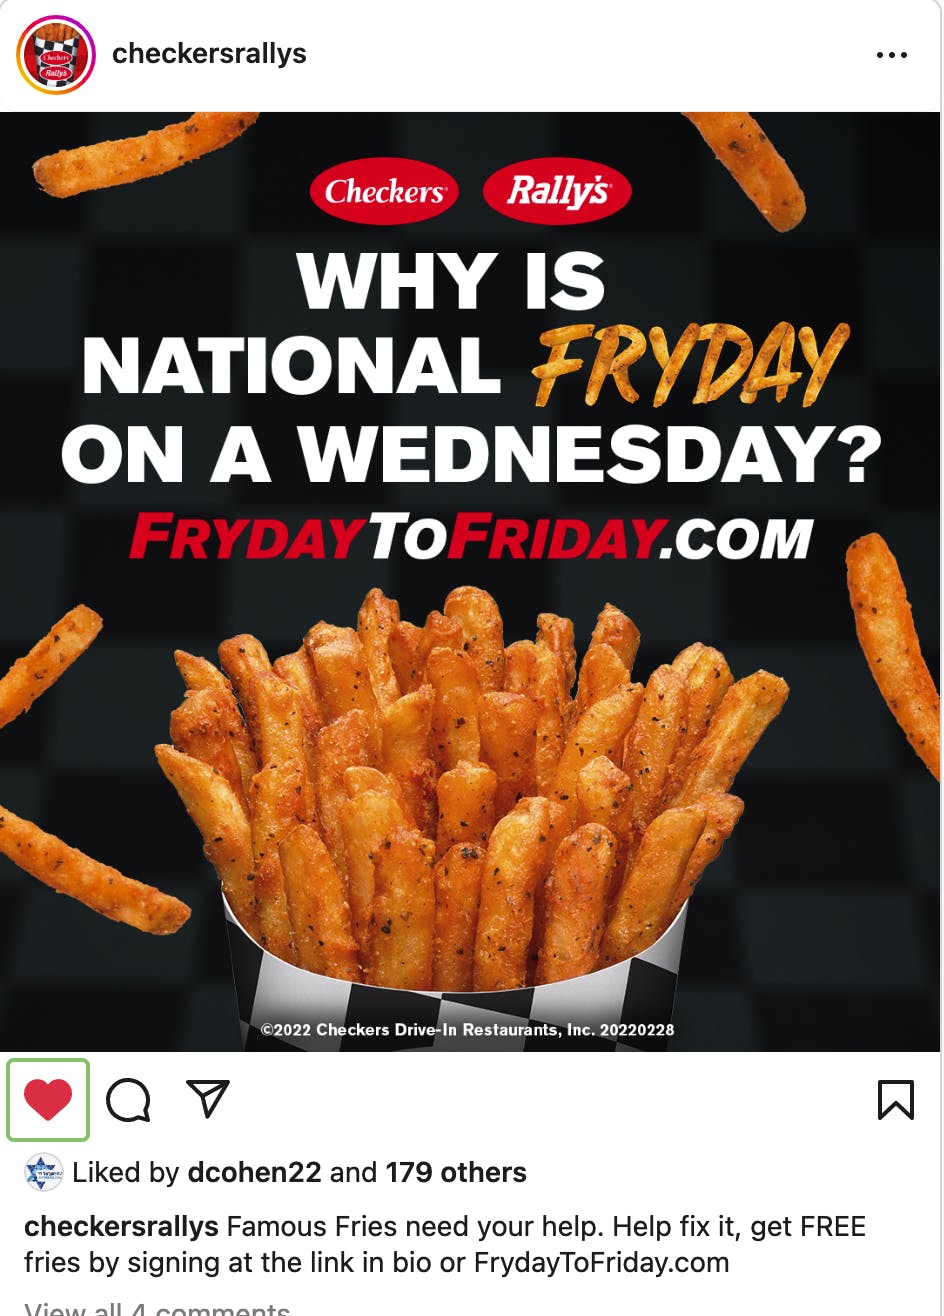 An ad for Fryday